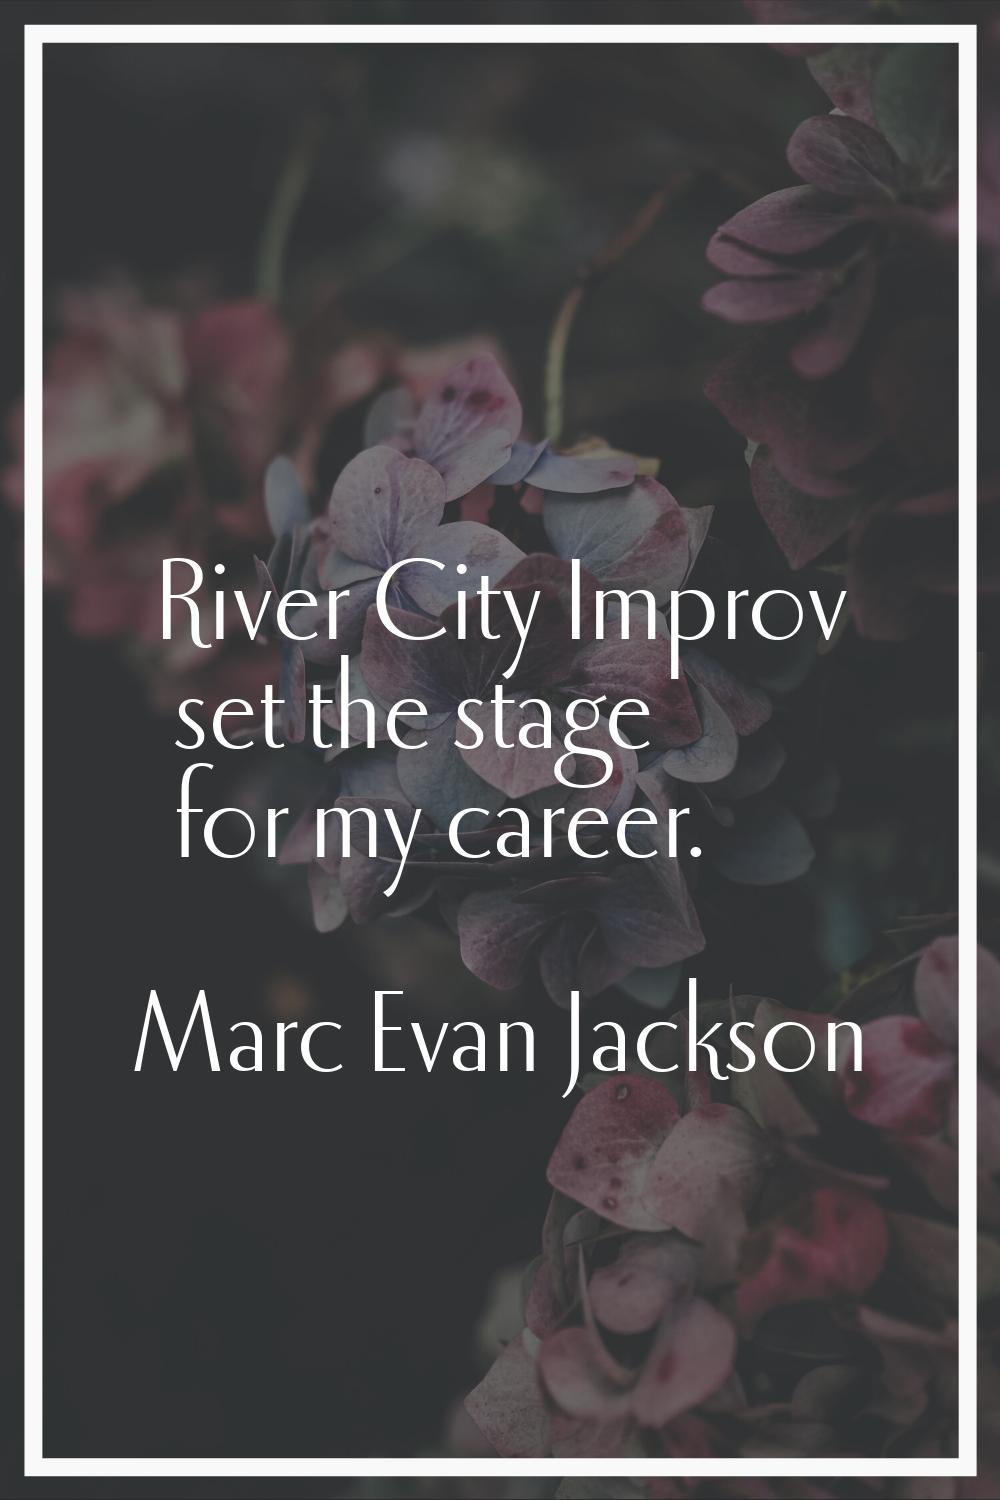 River City Improv set the stage for my career.